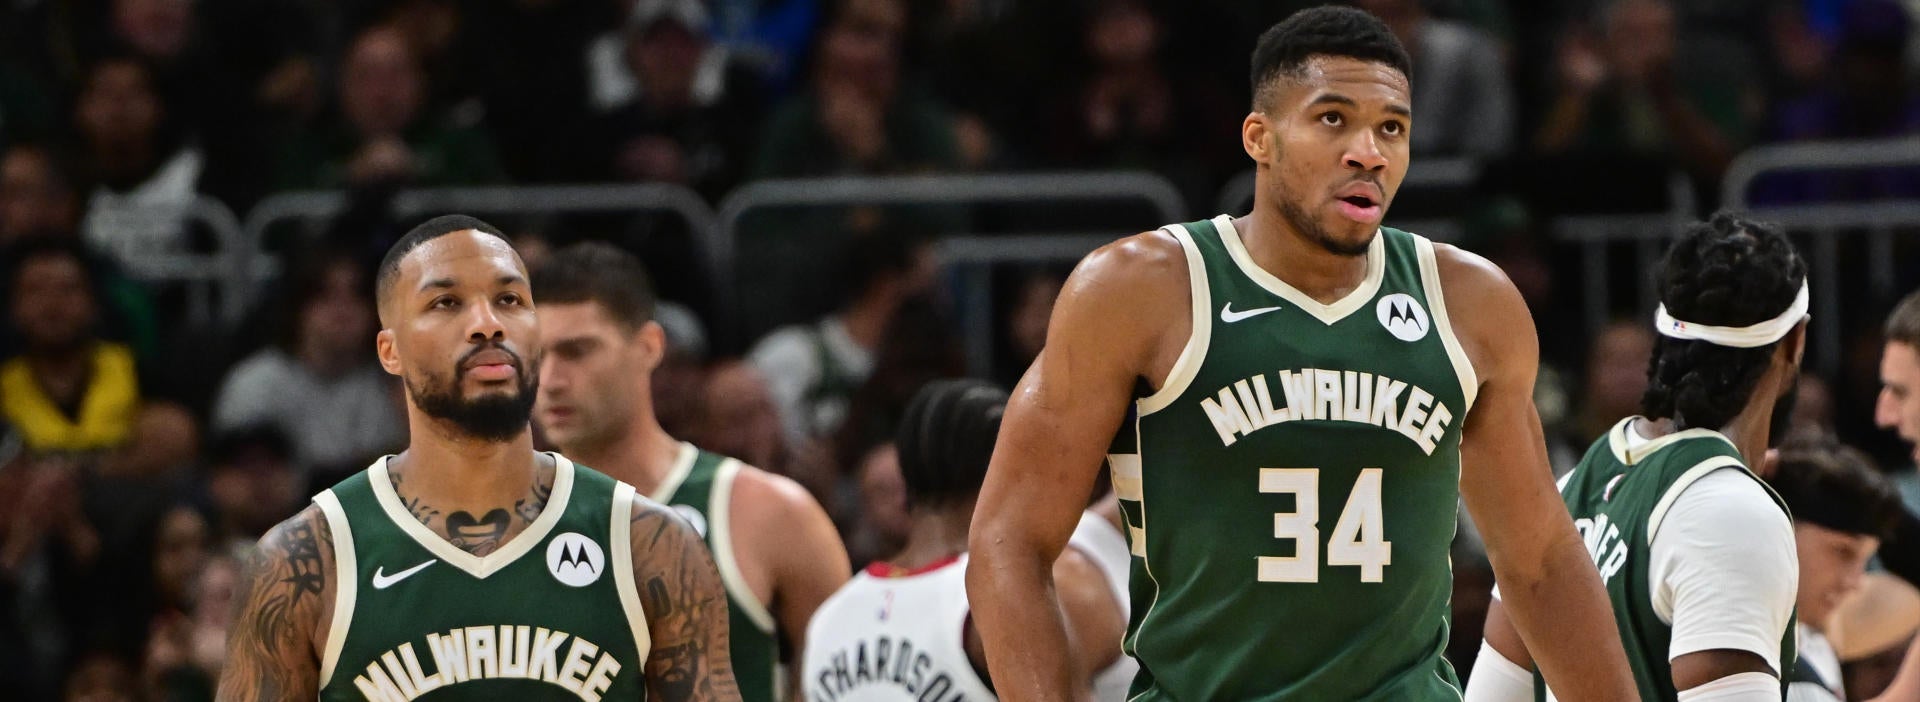 Bucks vs. Pacers Thursday NBA injury reports, odds, props: Giannis Antetokounmpo favored to post double-double after rare ejection Wednesday